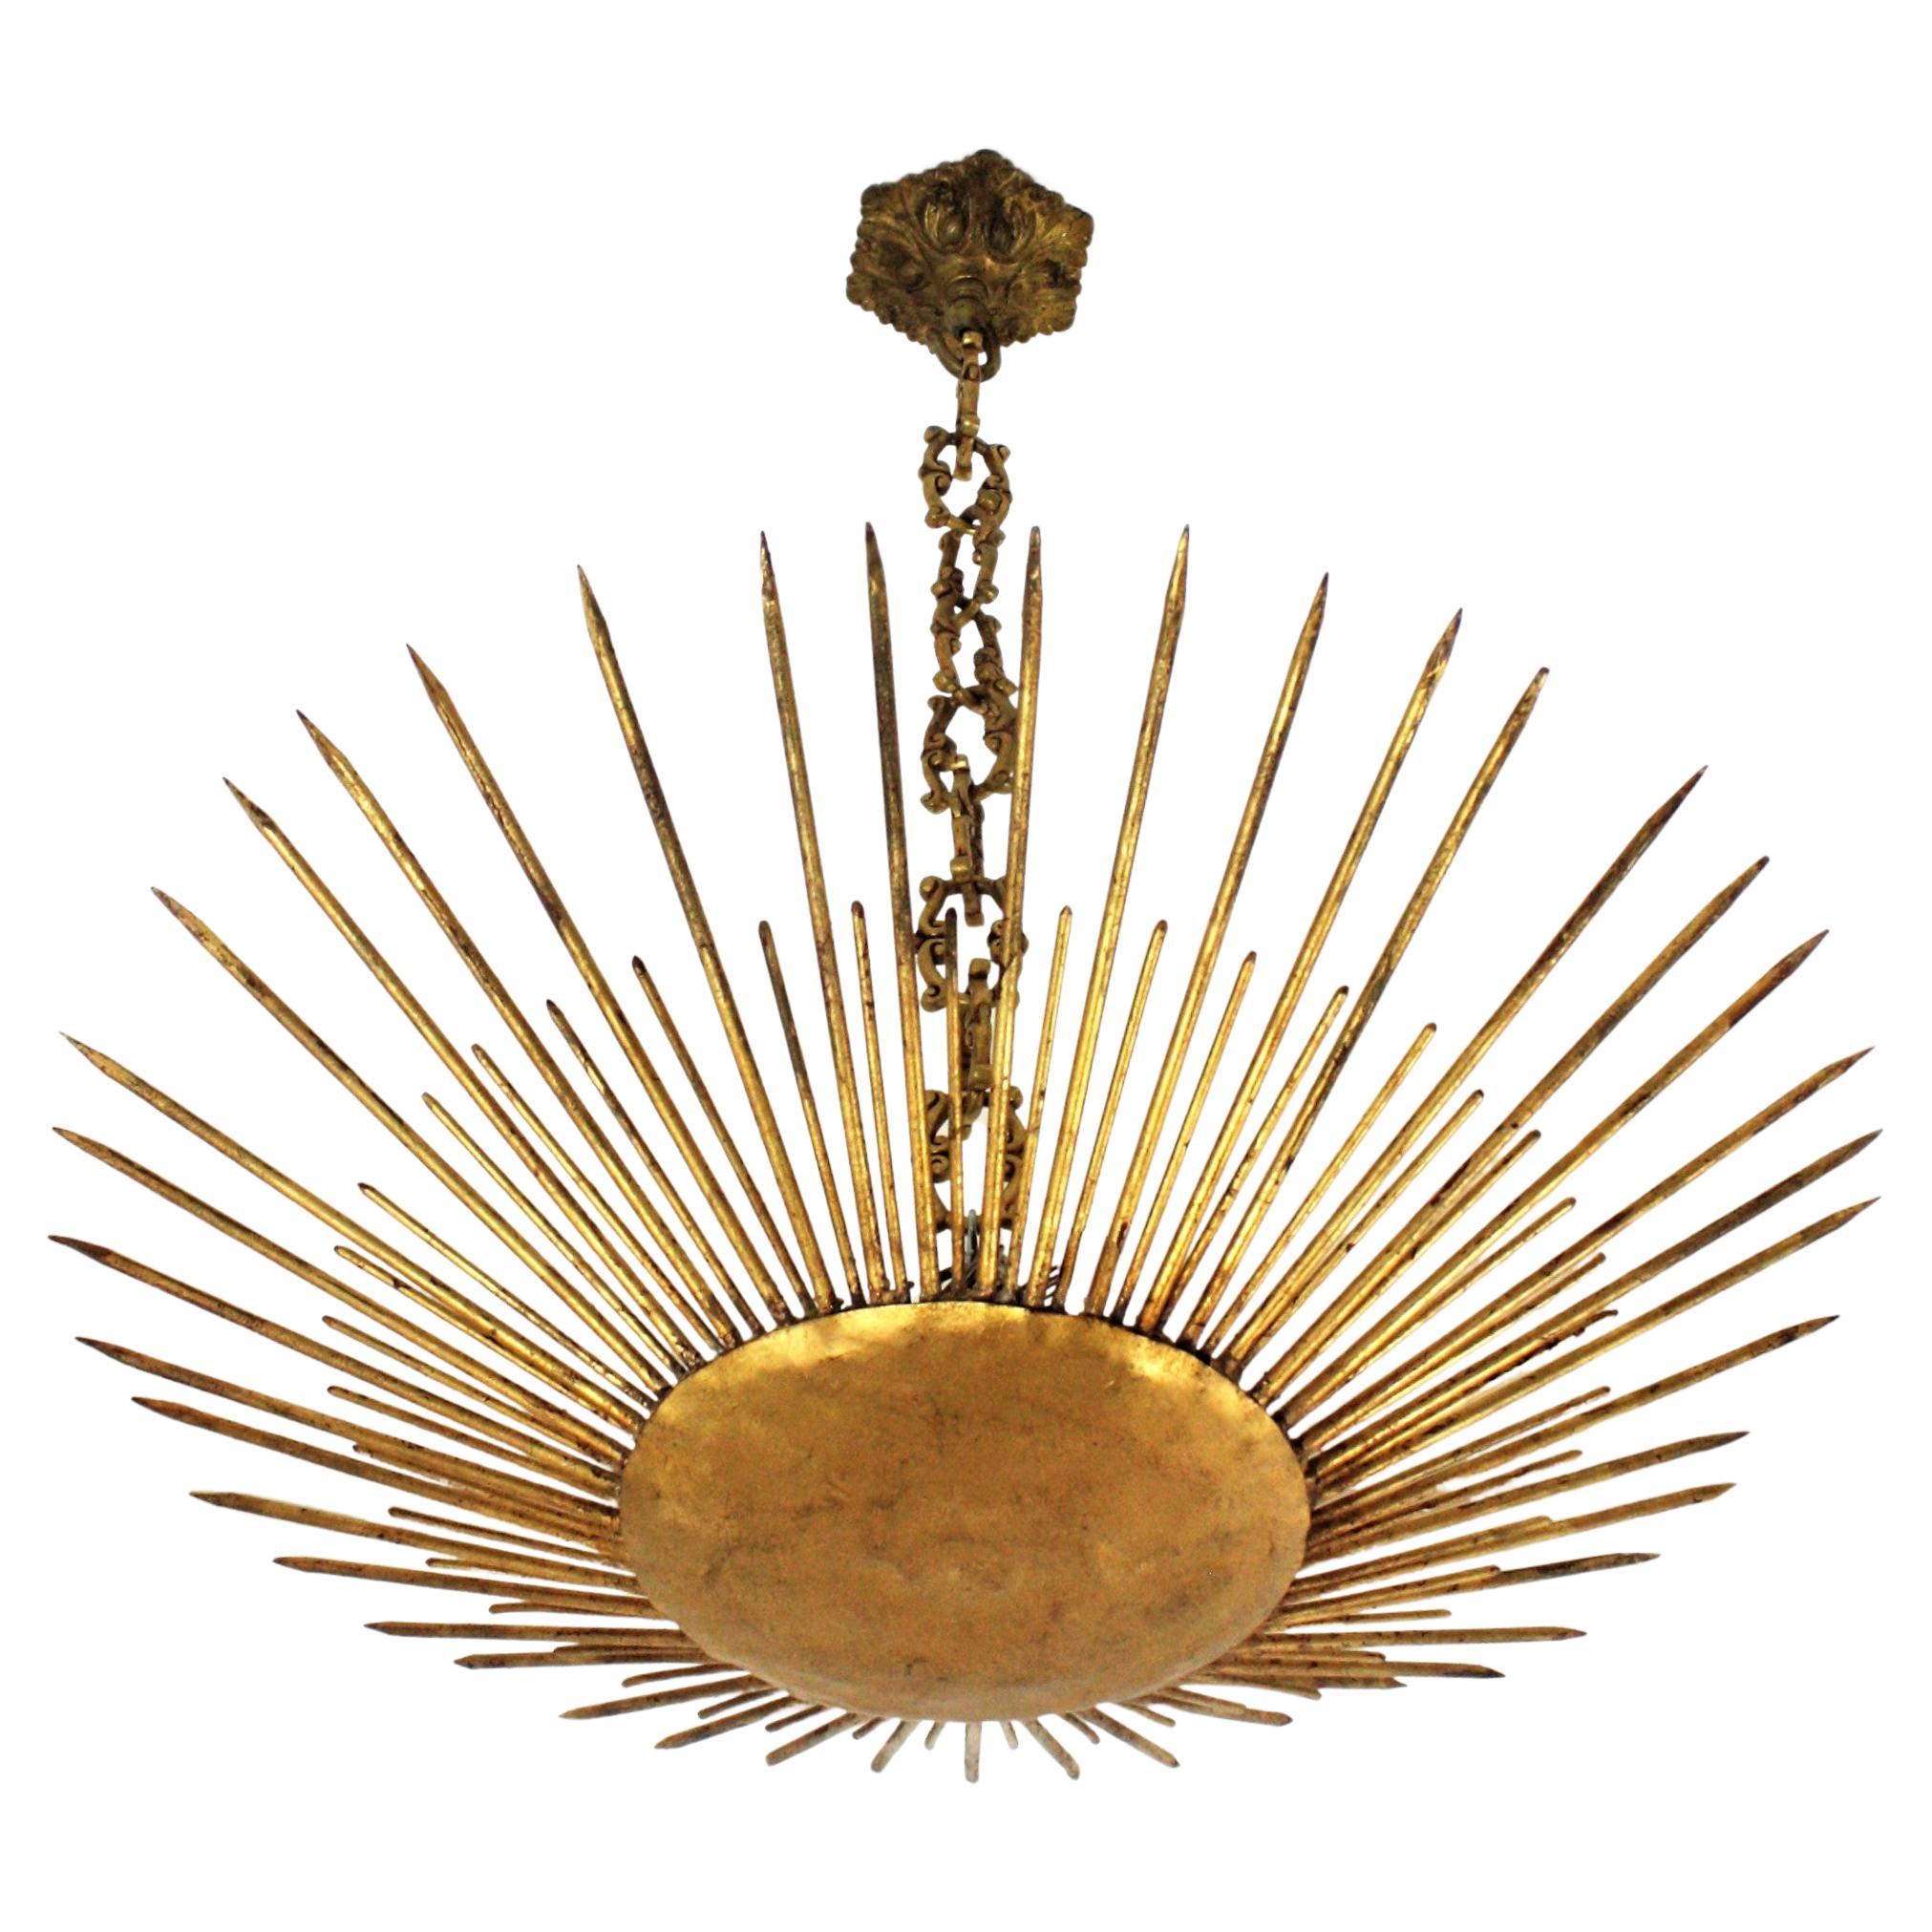 Gilt Iron Modern Neoclassical Sunburst Chandelier / Light Fixture, France, 1940s
This stunning hand-hammered gilt iron sunburst ceiling pendant was manufactured at the Art Deco Period. It has accents in transition to Brutalist style. 
A sunburst